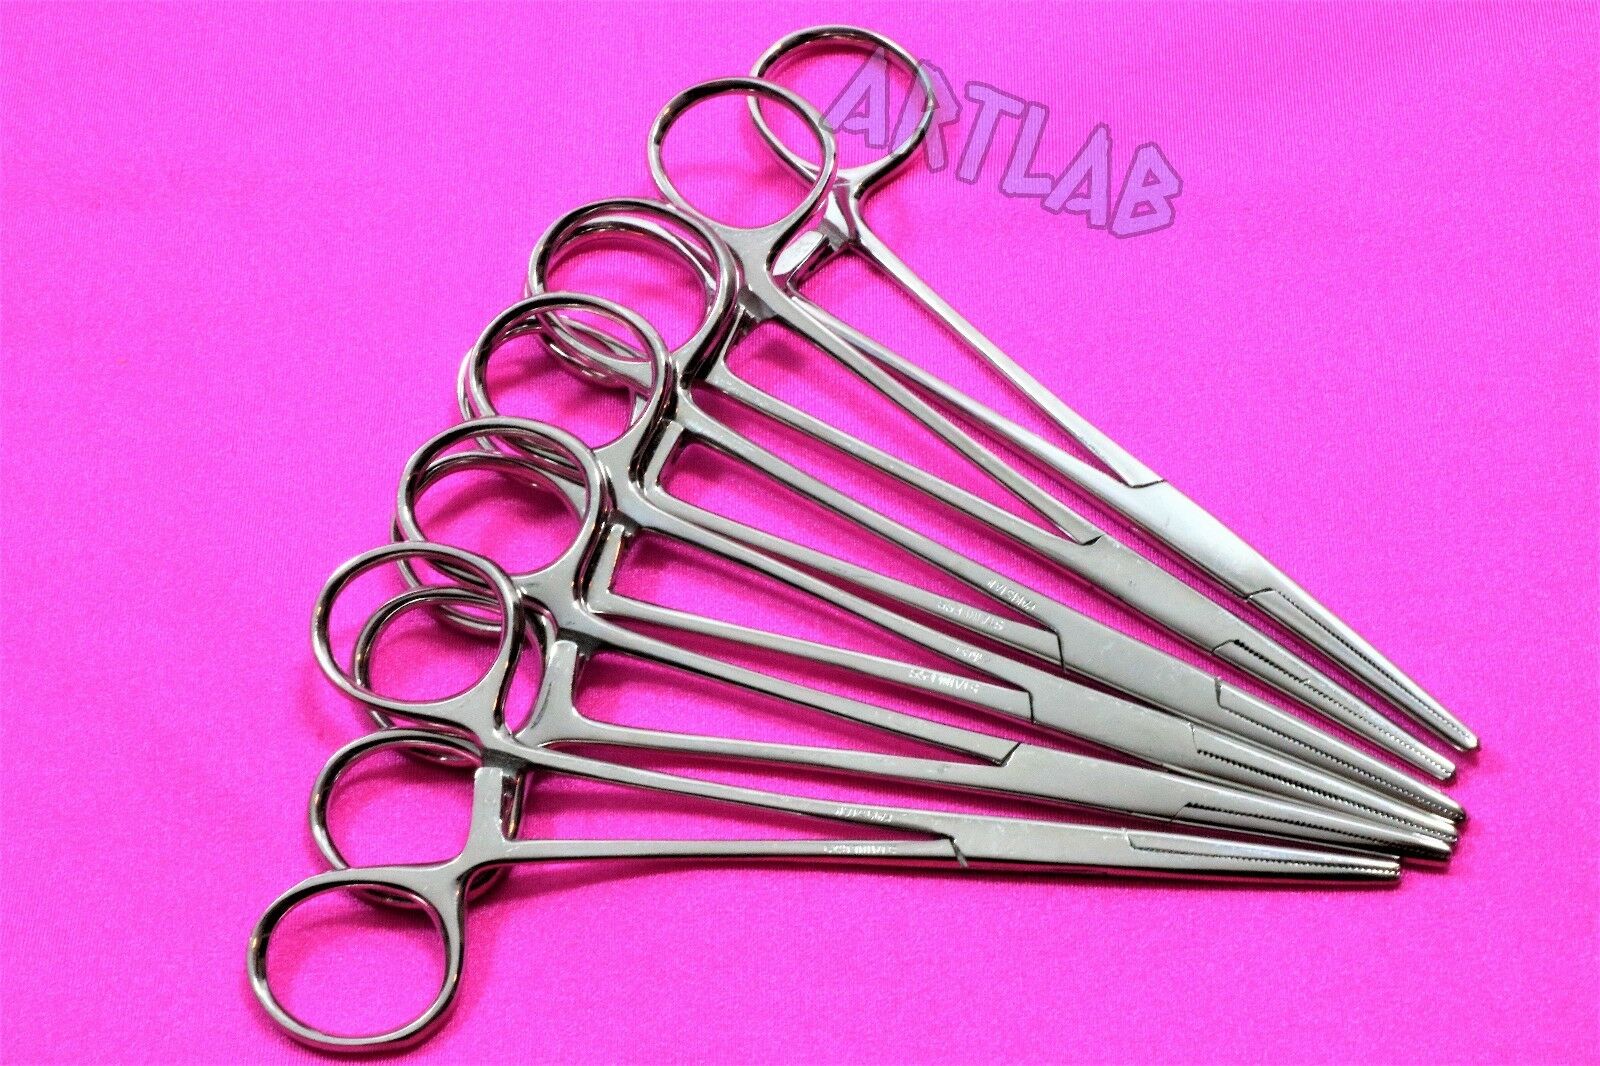 6 Pc Mosquito Hemostat Forceps 5" Straight Stainless Steel Surgical Medical